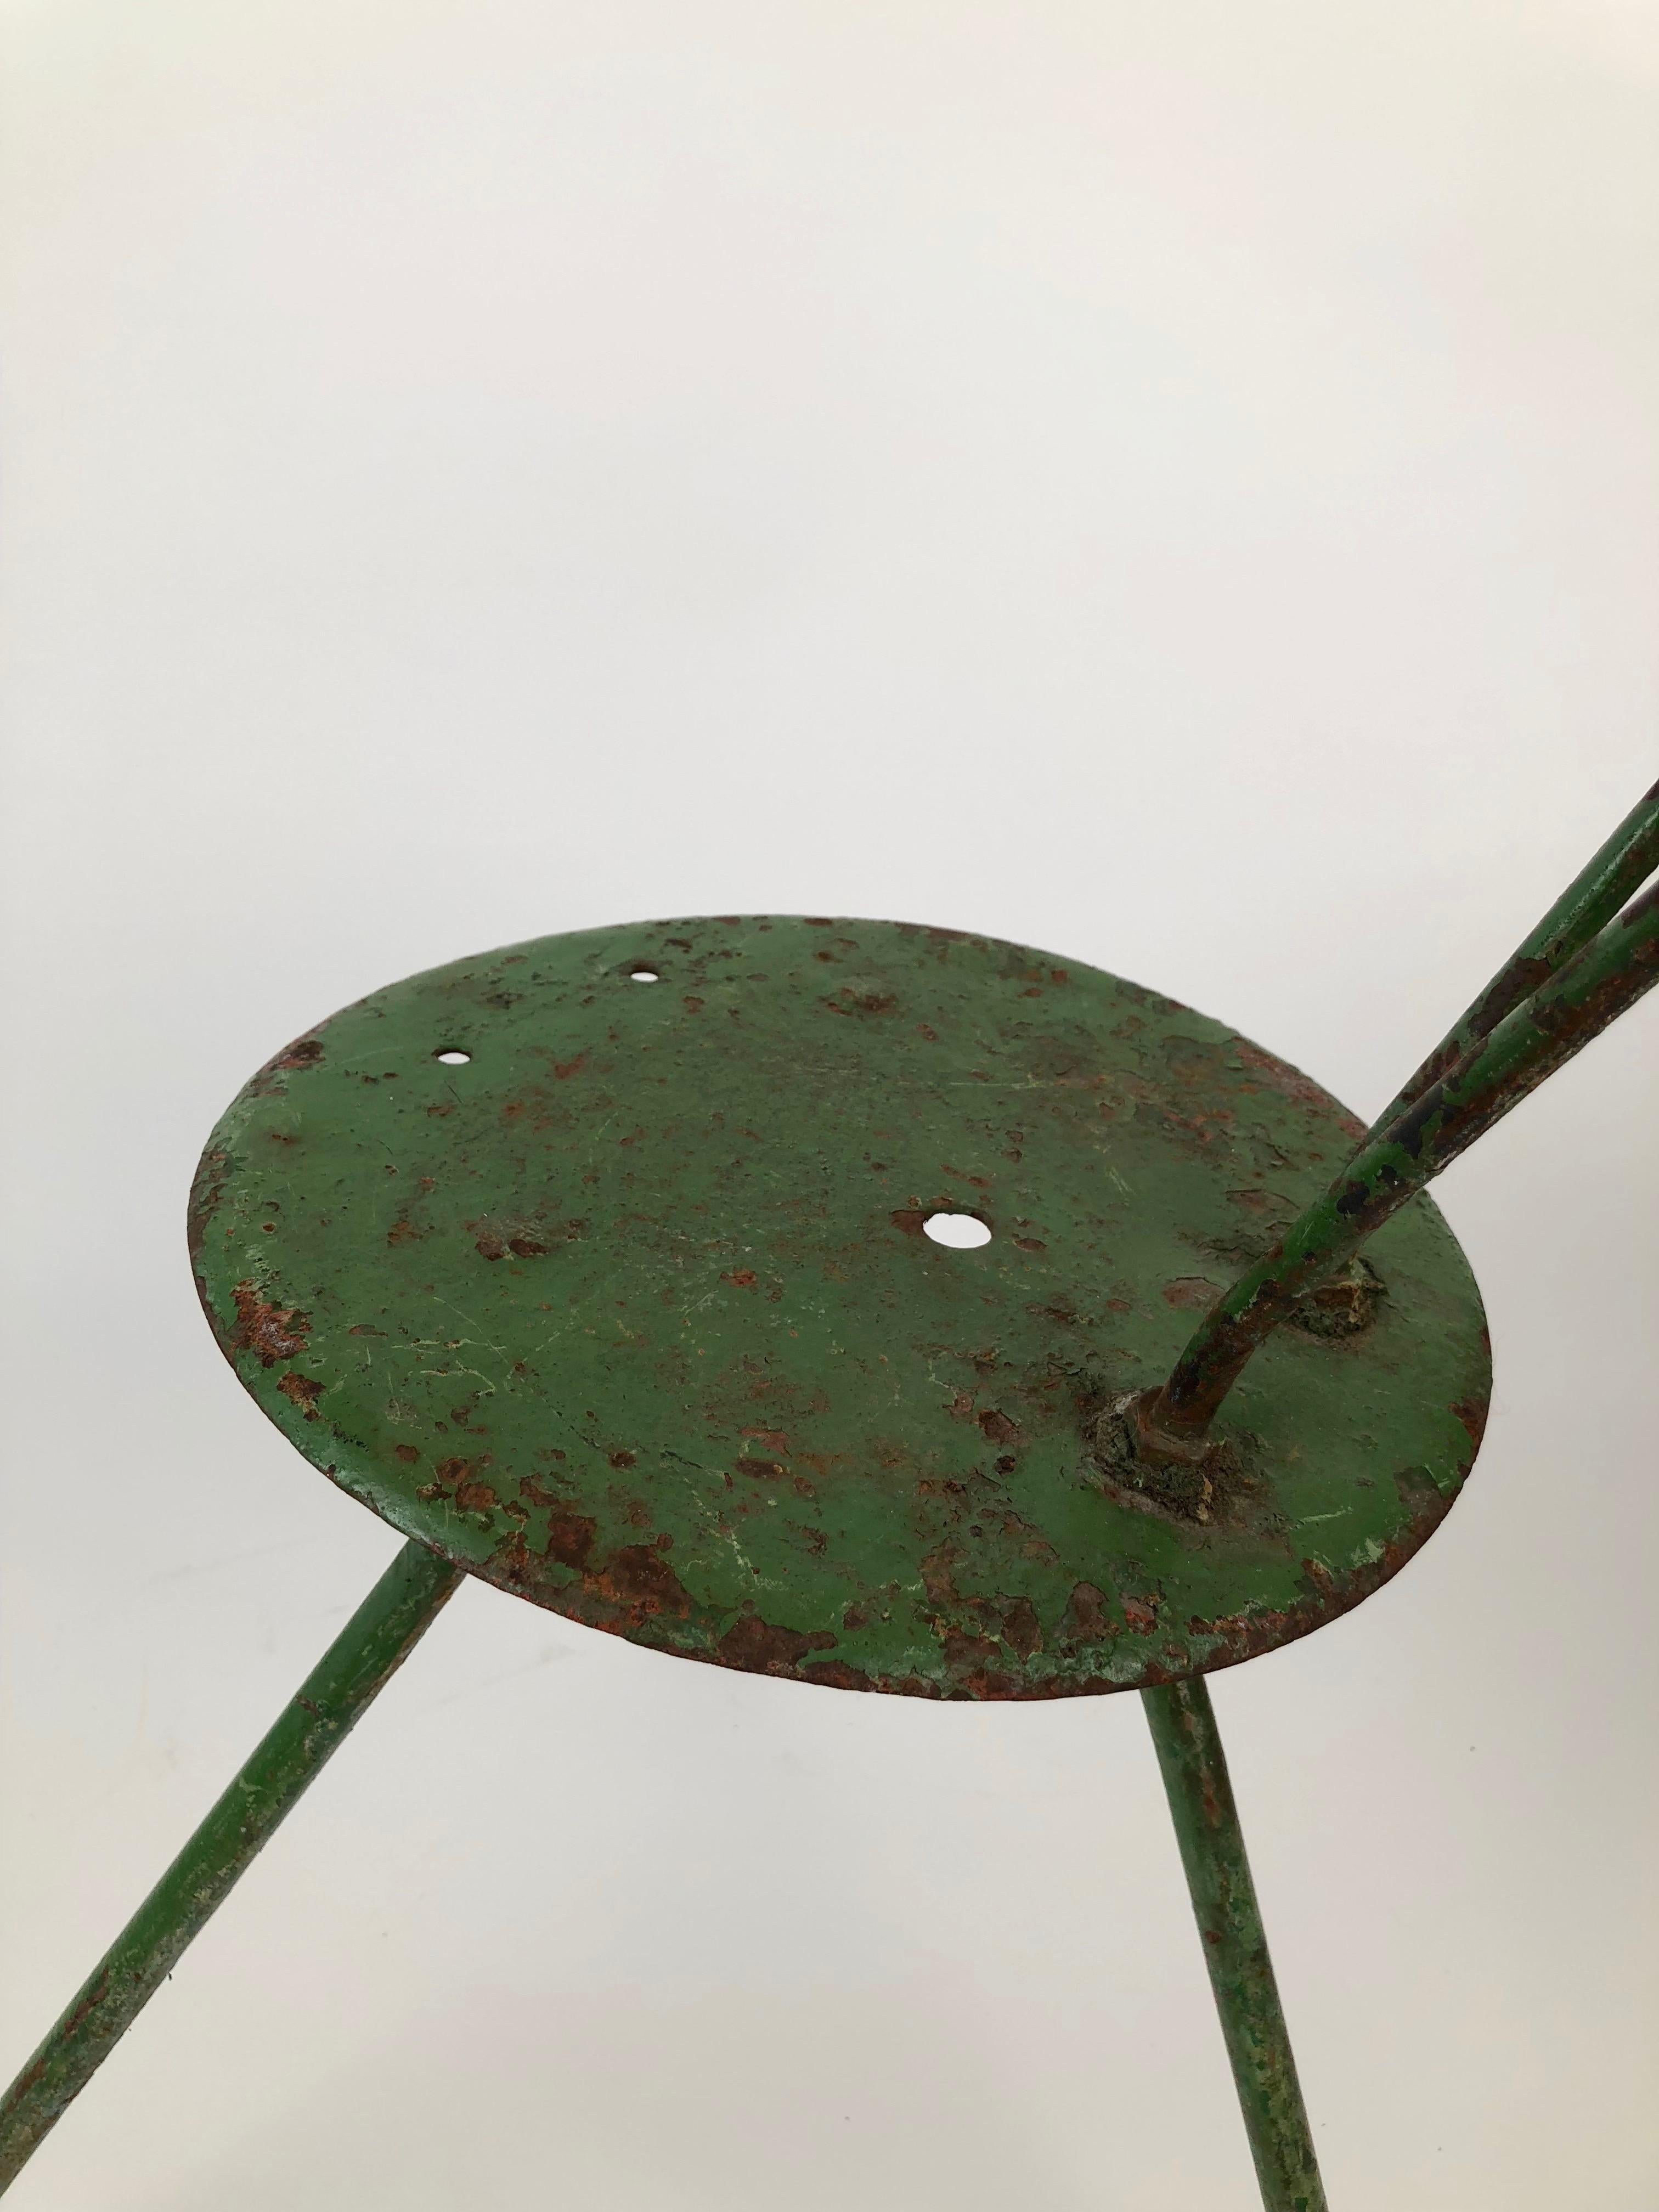 Pair of Handmade Metal Chairs, 1950s, from the Balaton Lake Region, Hungary In Good Condition For Sale In Vienna, Austria